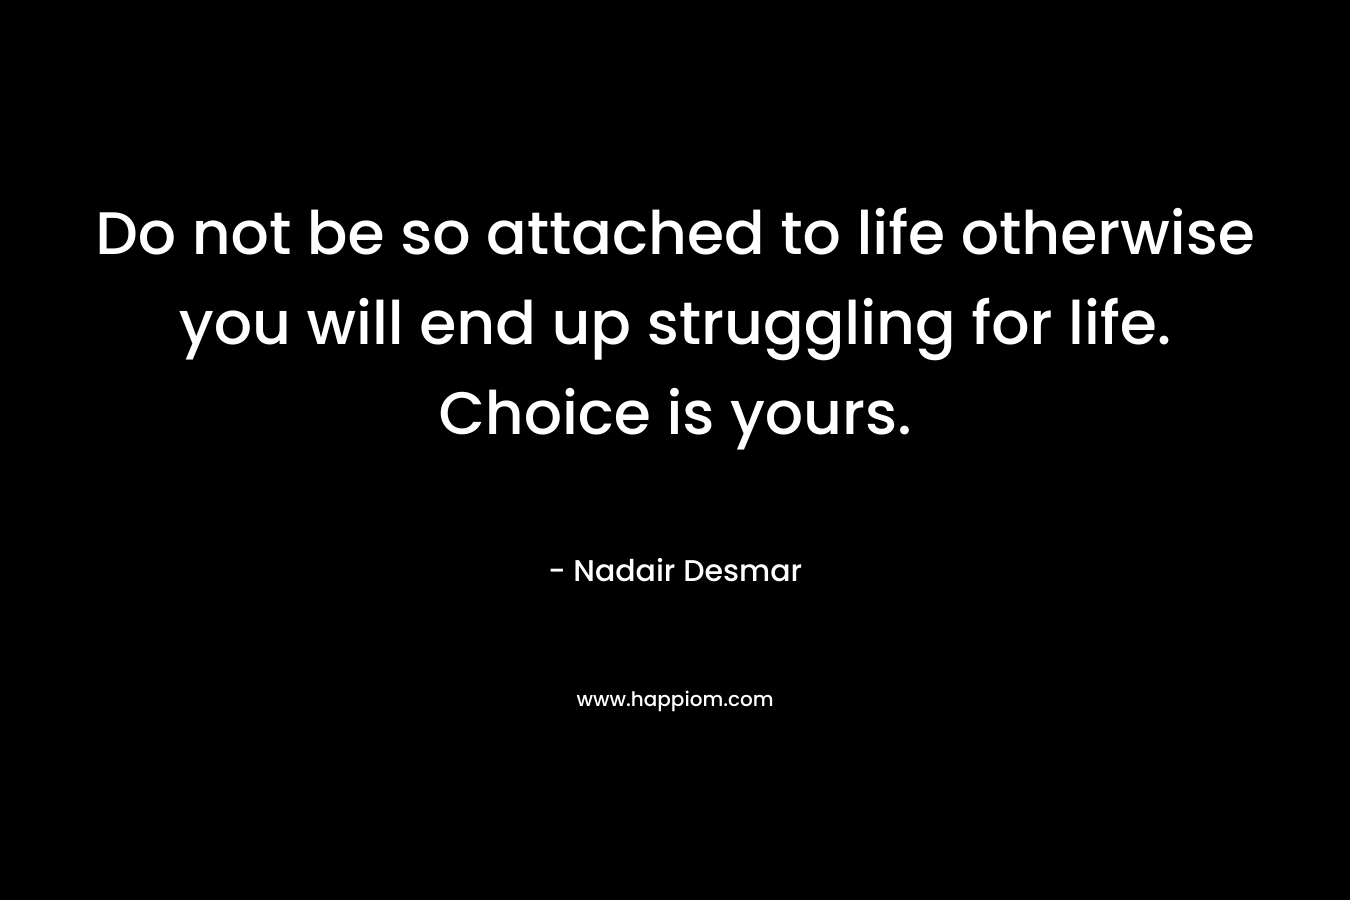 Do not be so attached to life otherwise you will end up struggling for life. Choice is yours. – Nadair Desmar